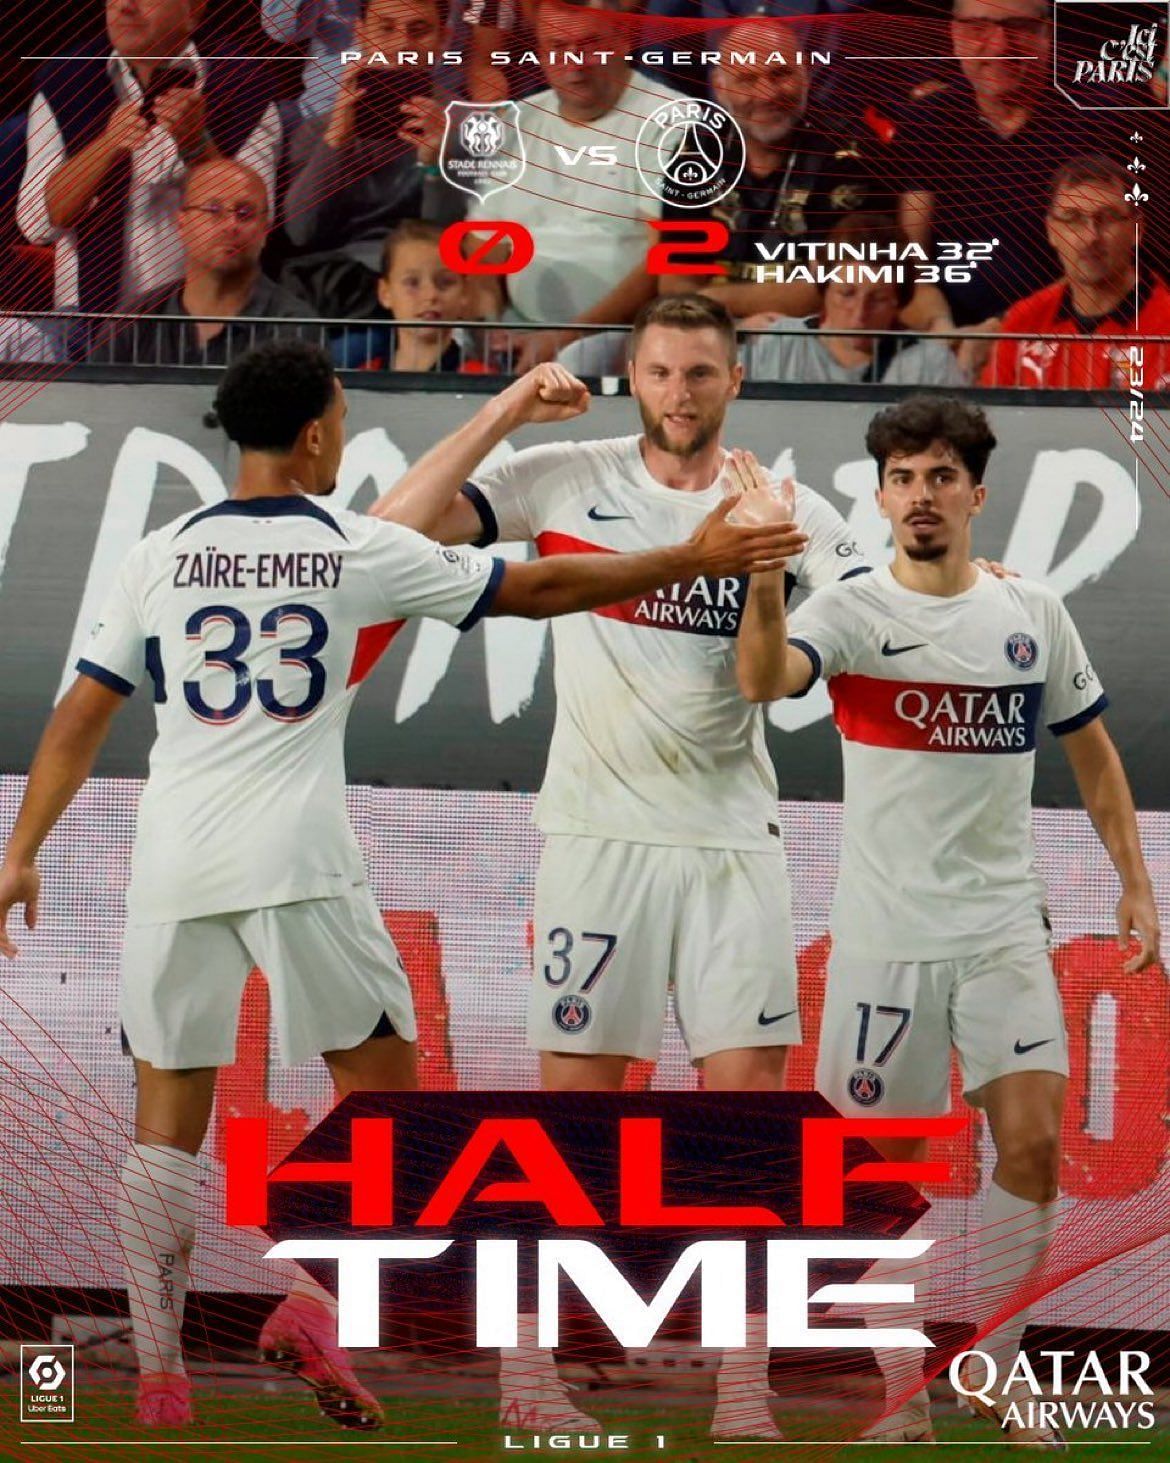 PSG posted this half-time graphic via their X (Twitter) account.